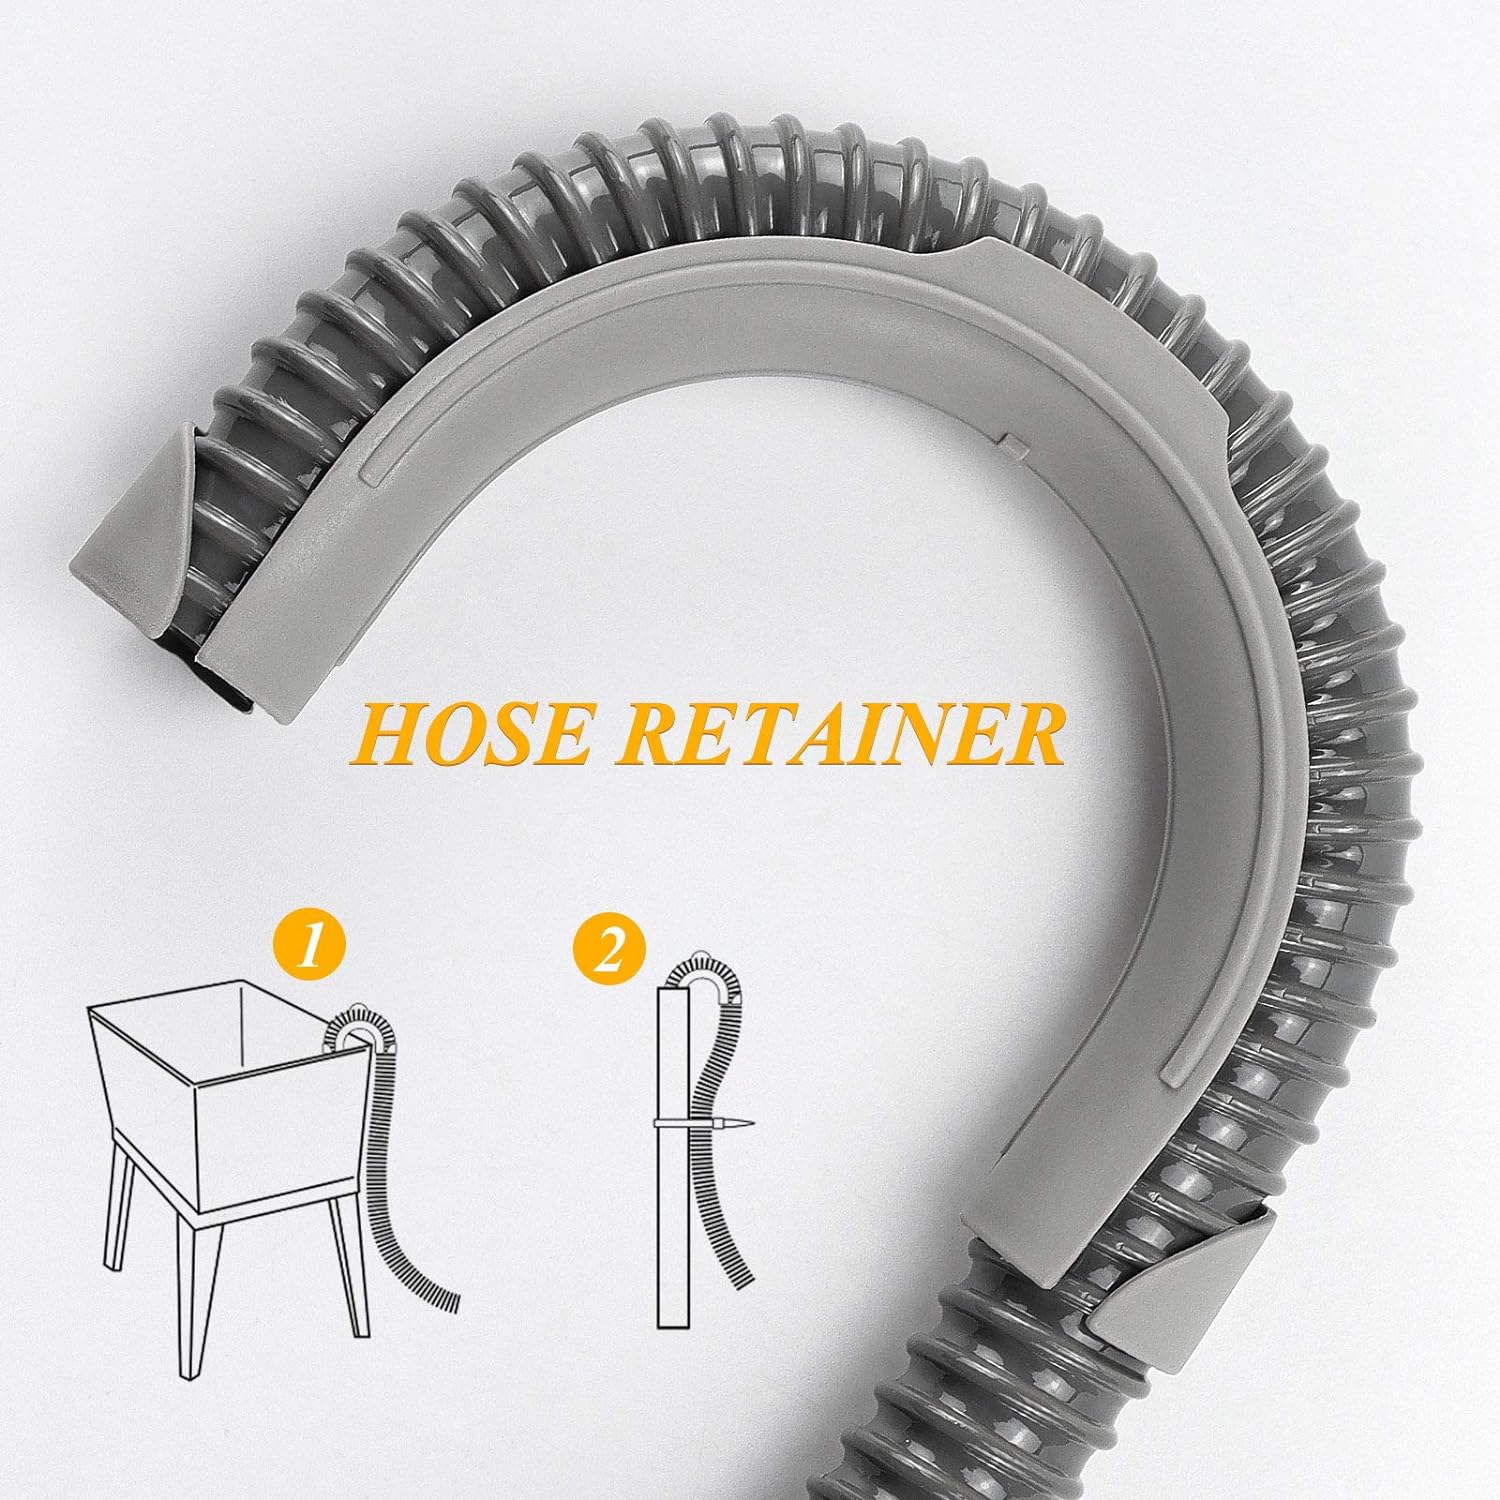 Wsh supplier 12 ft Universal Washing Machine Drain Hose, Heavy Duty Washer Hose, Corrugated and Flexible Washer Hoses with Clamp by TOMOON